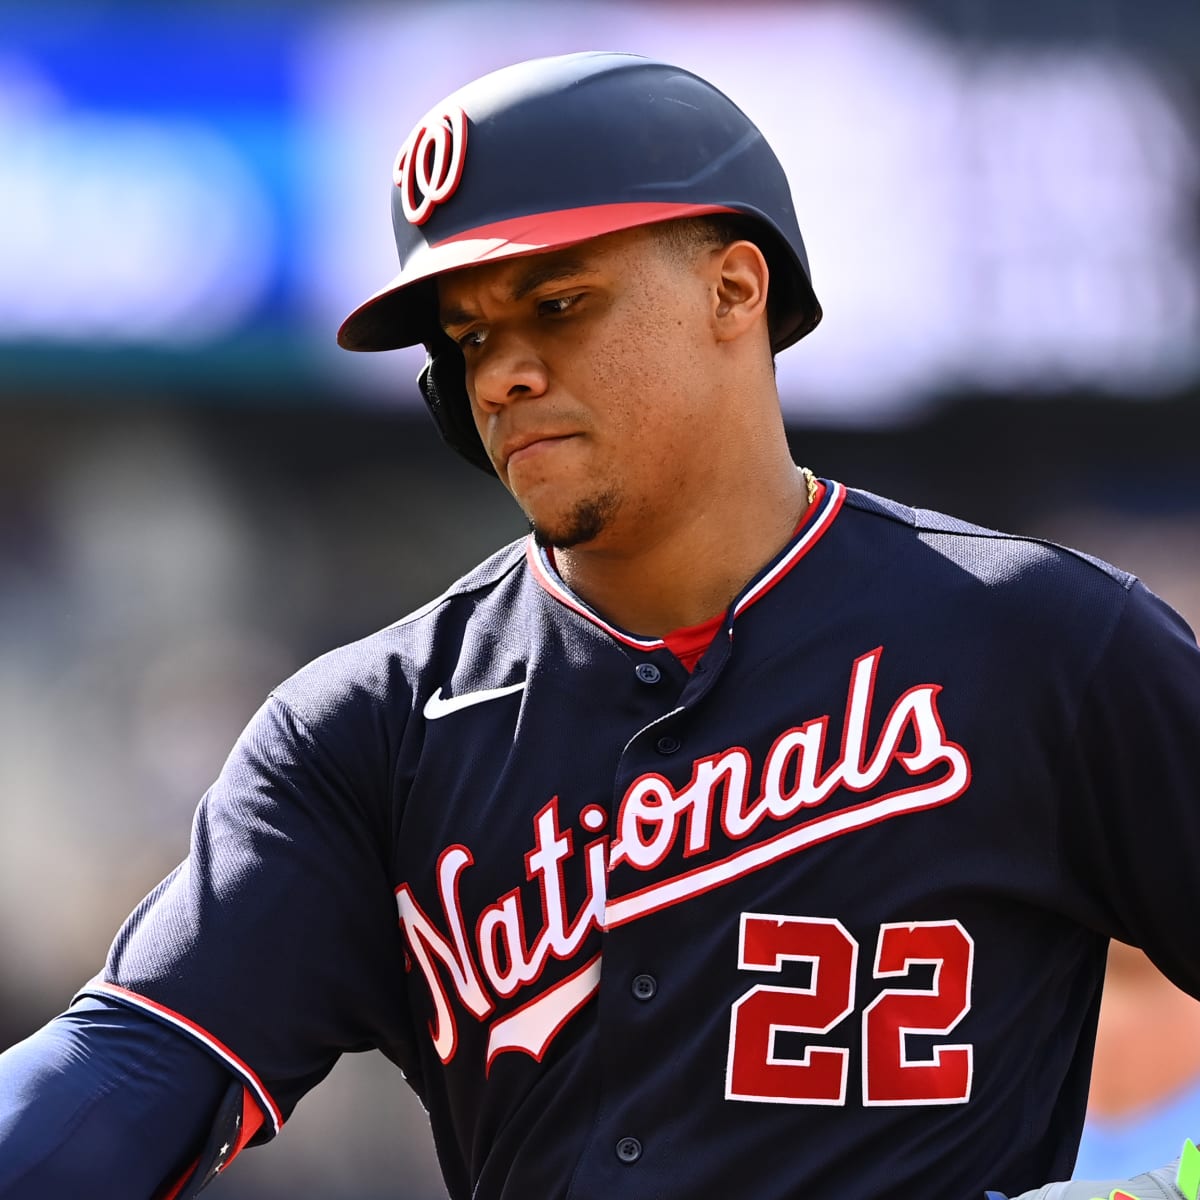 Washington Nationals' Juan Soto getting there as he builds back up